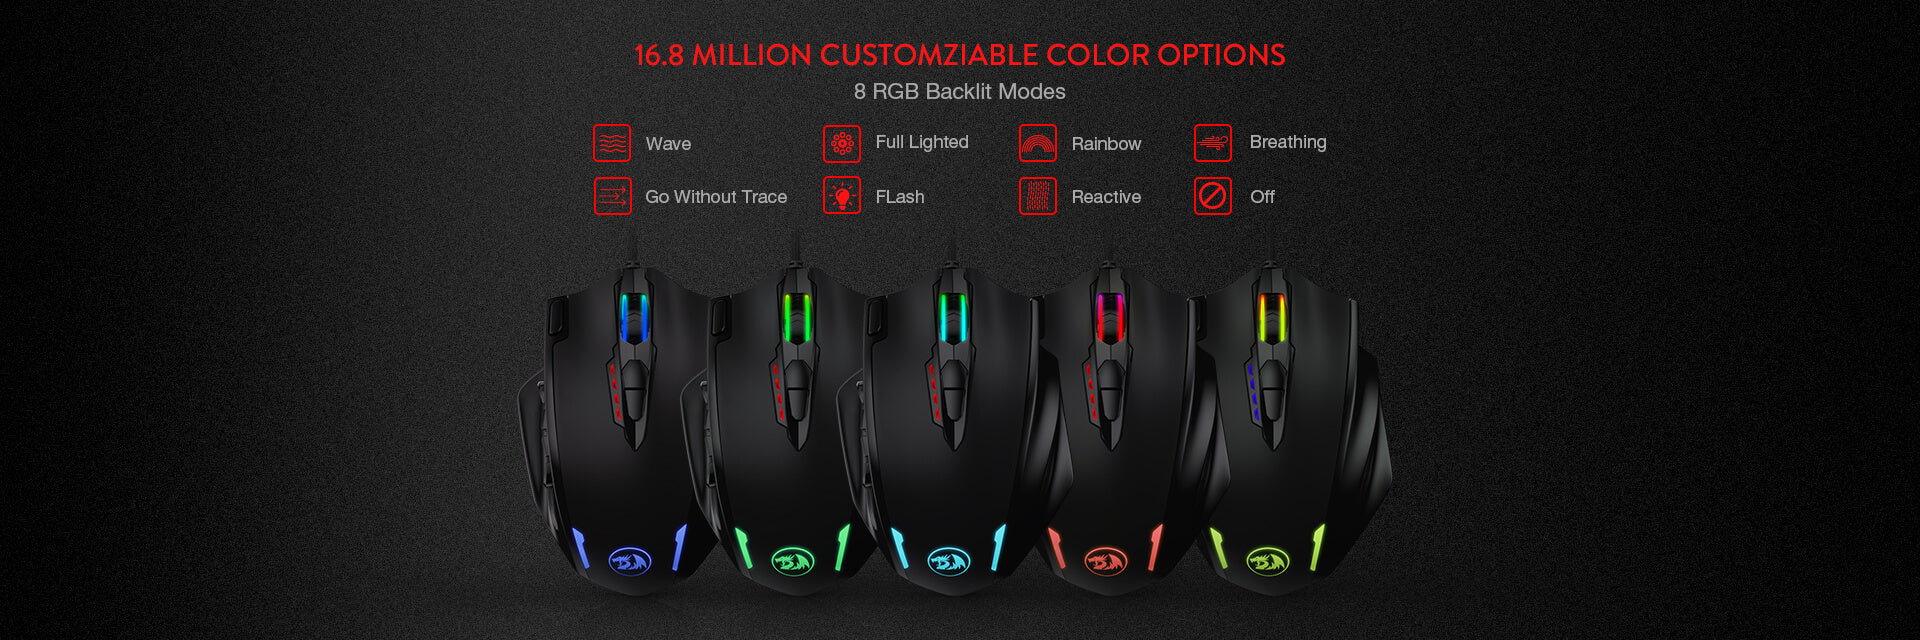 redragon m908 impact mmo gaming mouse